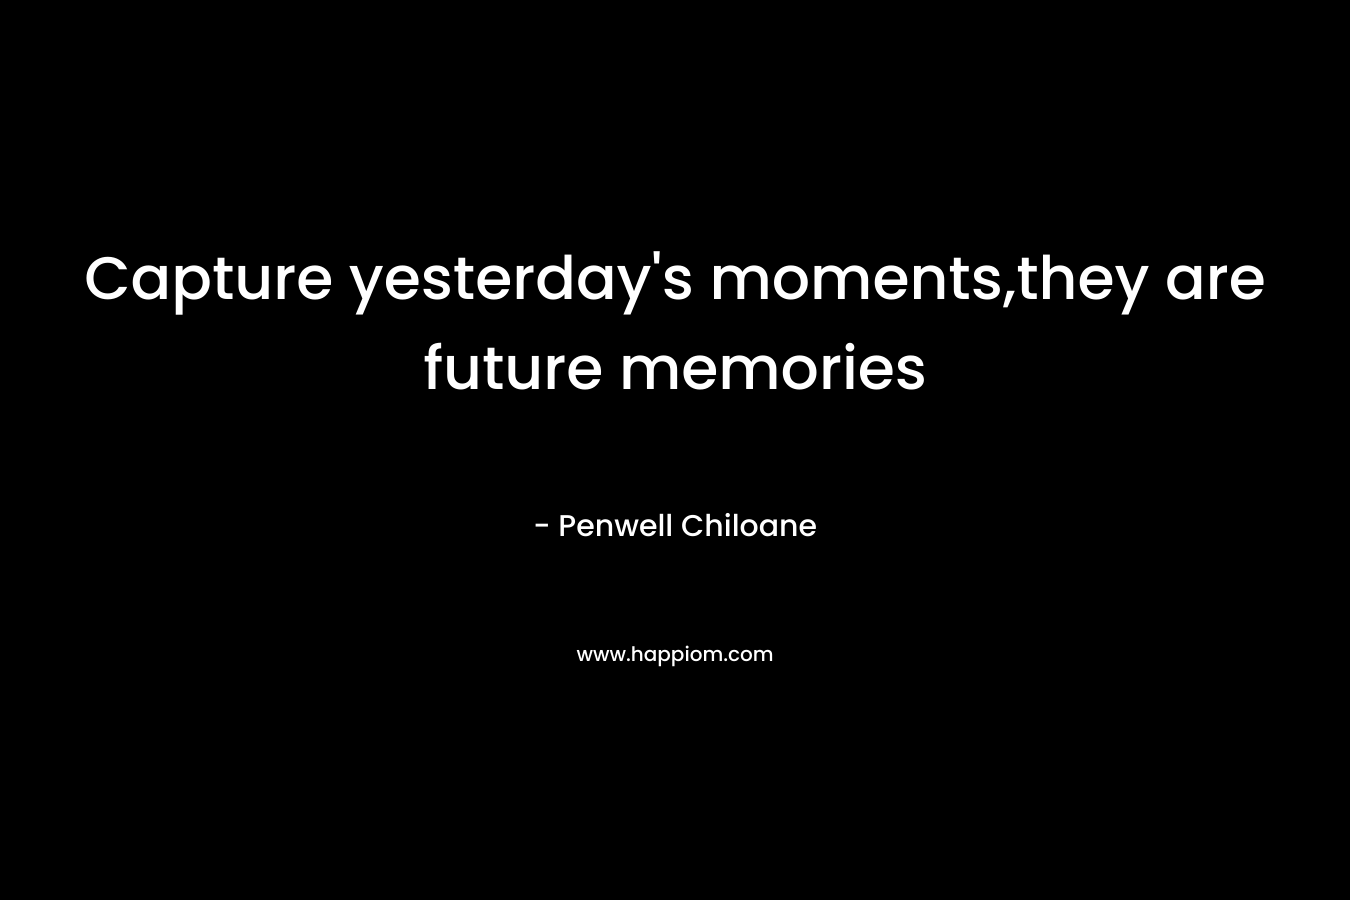 Capture yesterday's moments,they are future memories